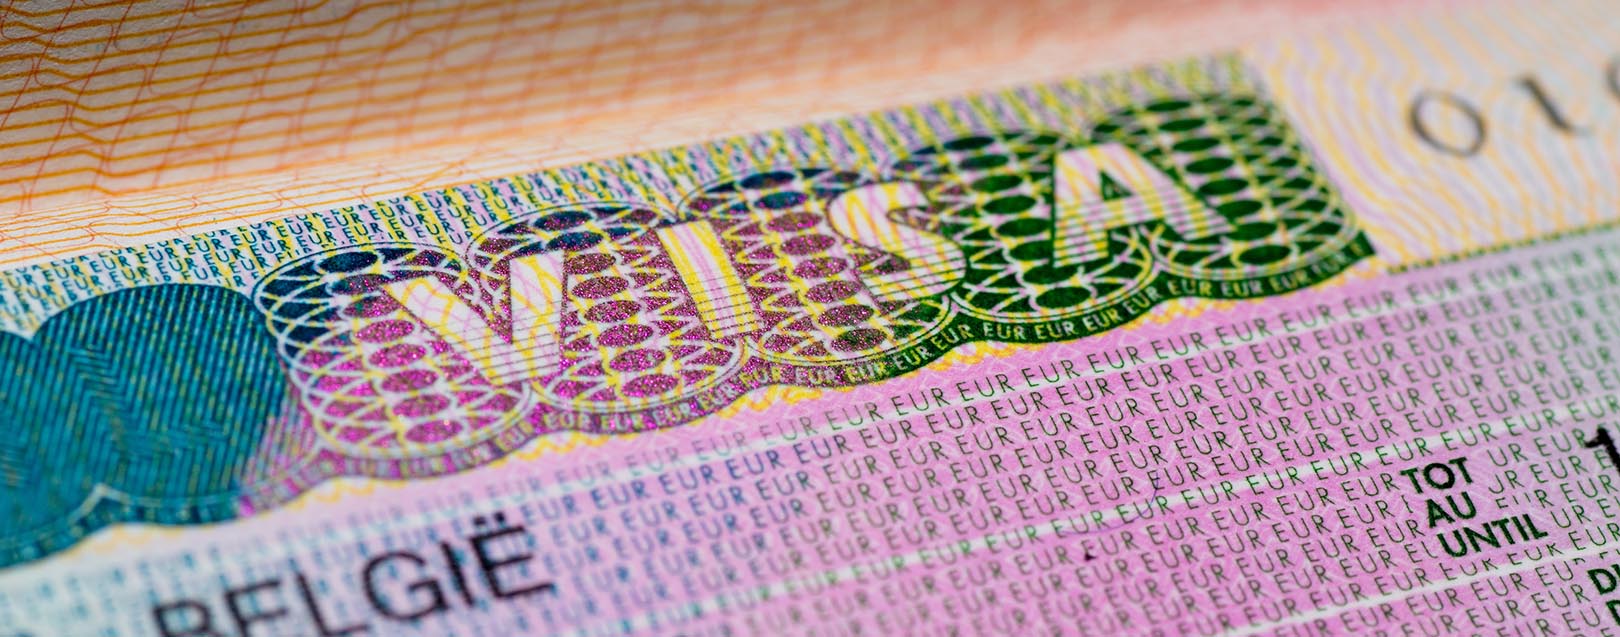 Govt to ease visa regime to boost service exports